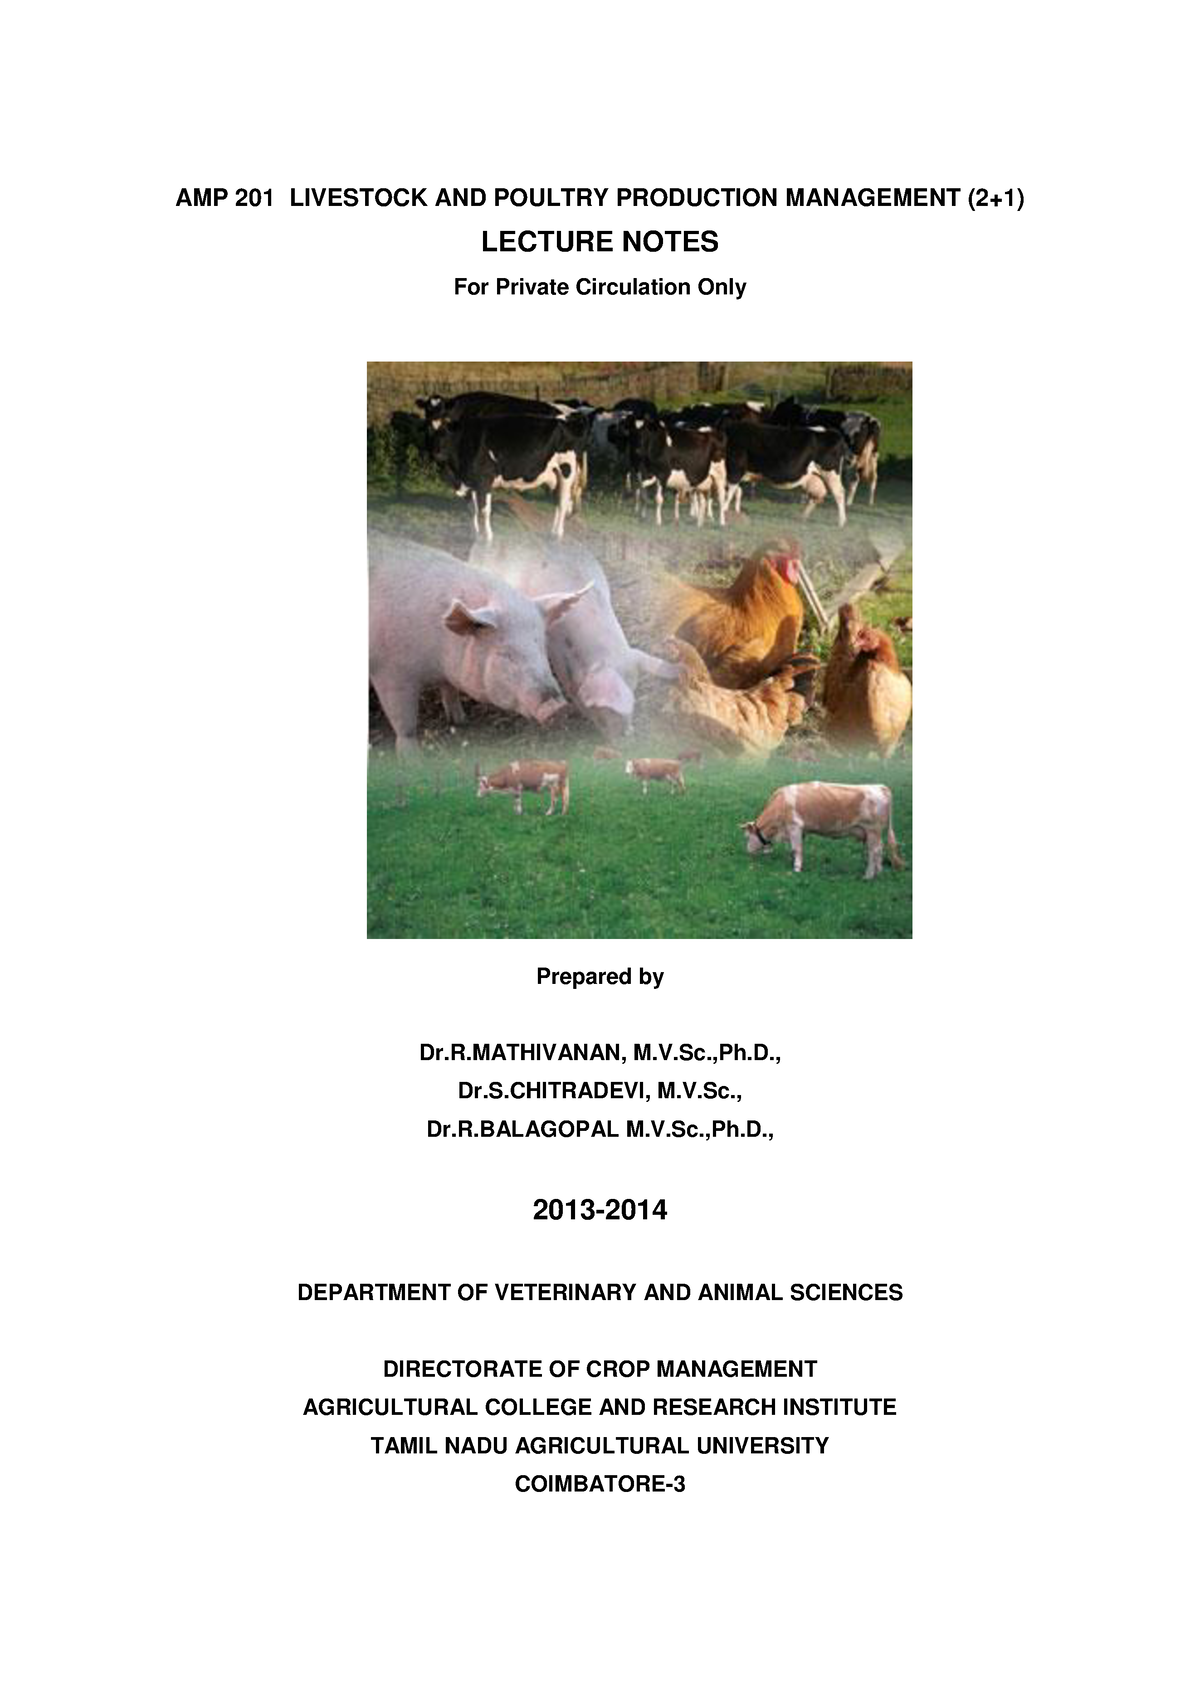 AMP 201 theory recent - AMP 201 LIVESTOCK AND POULTRY PRODUCTION MANAGEMENT  (2+1) LECTURE NOTES For - Studocu